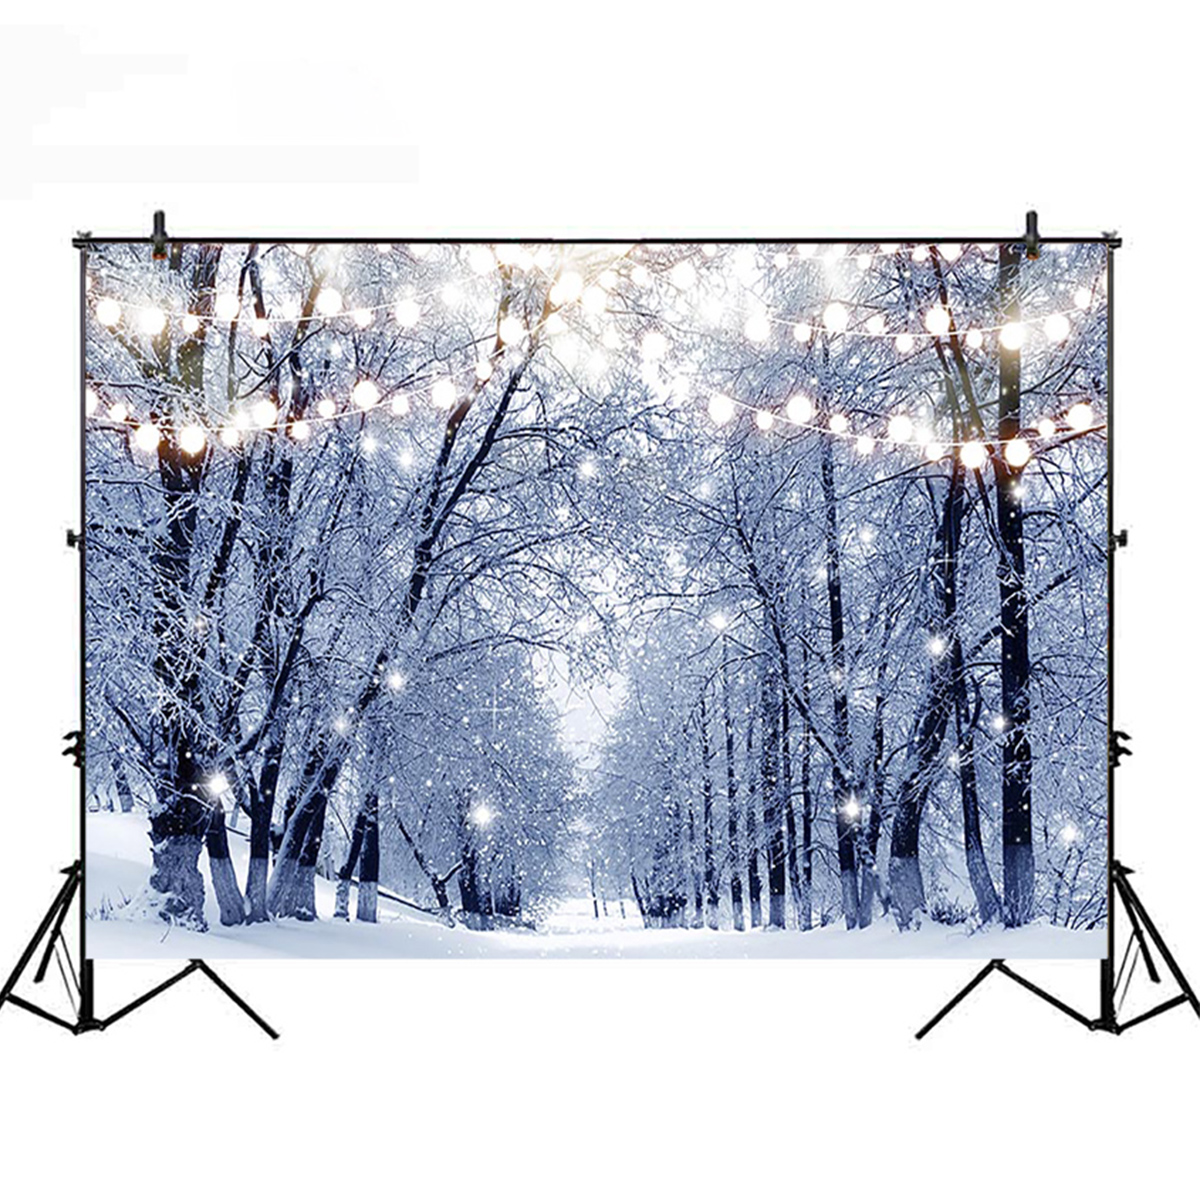 5x3FT-7x5FT-8x6FT-Light-Strip-Winter-Snow-Forest-Street-Photography-Backdrop-Background-Studio-Prop-1609475-1